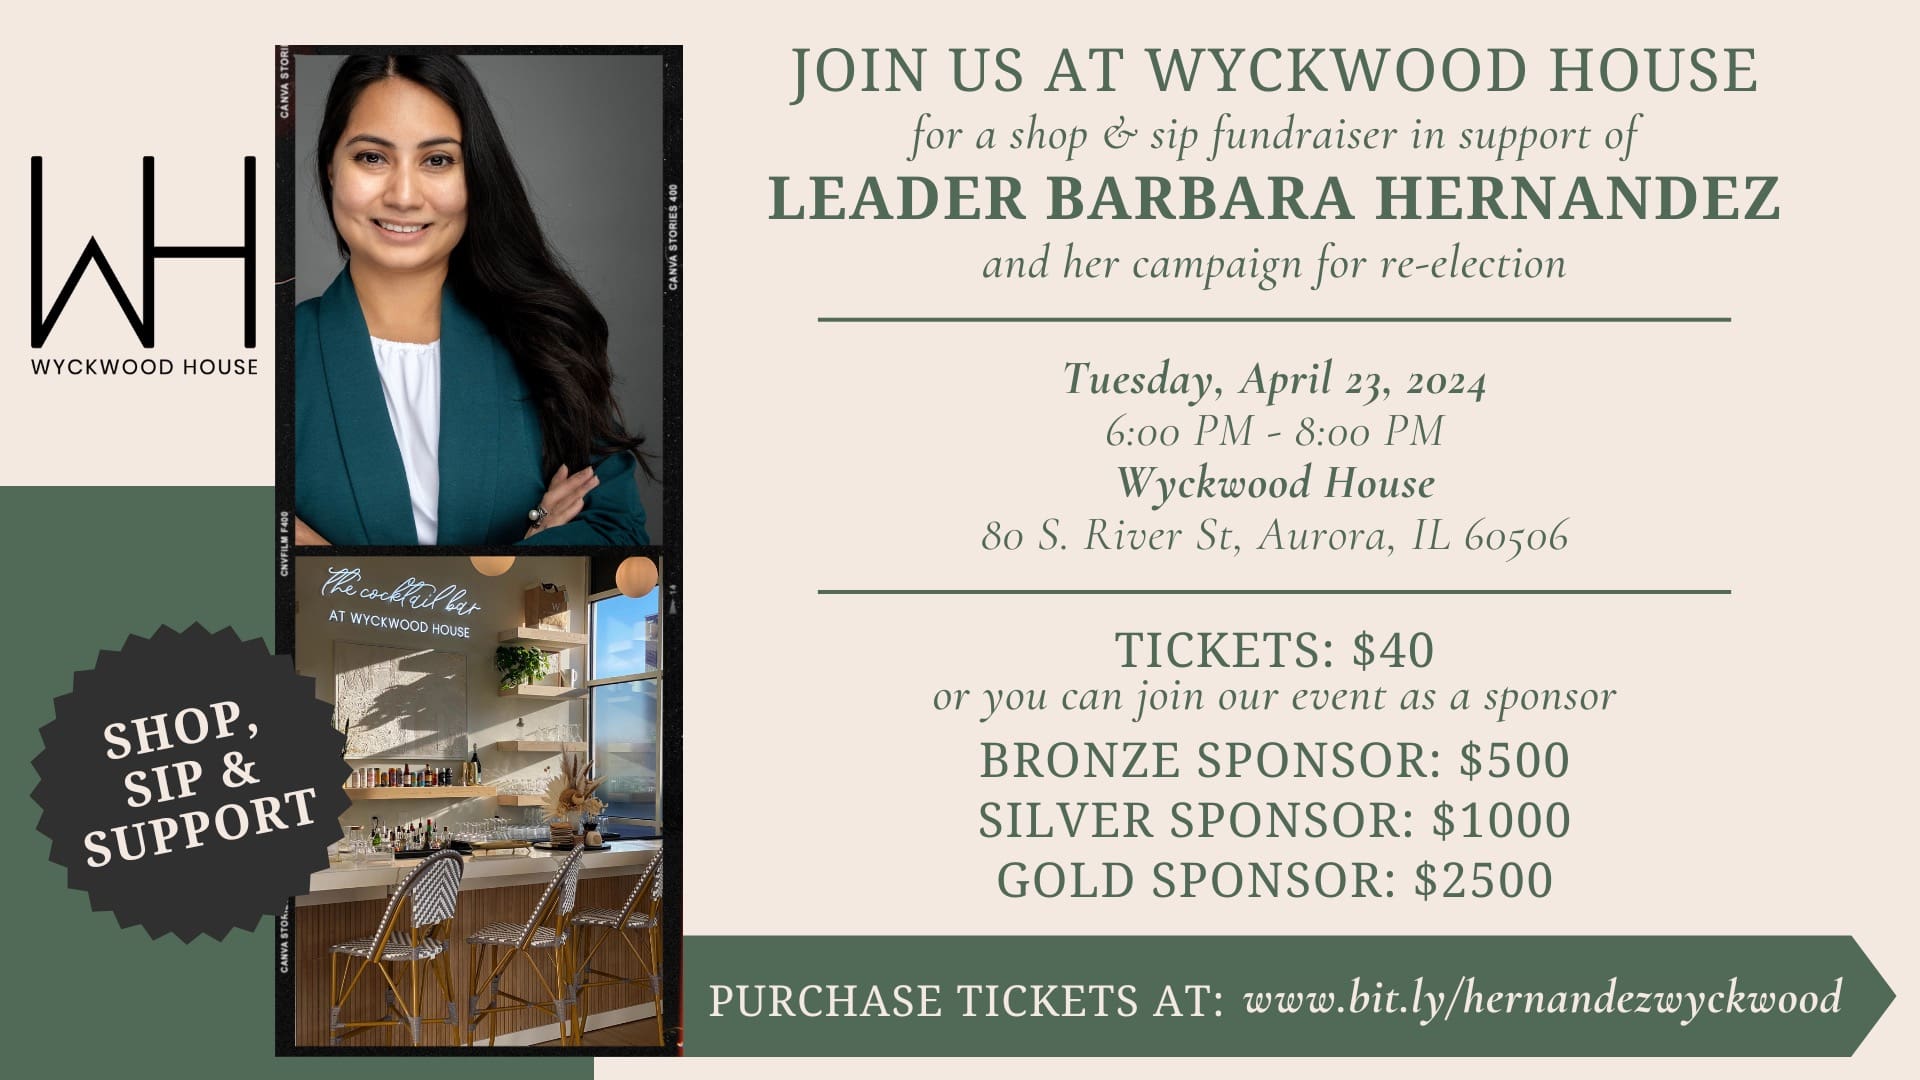 Keep your calendar open for Tuesday April 23. 📆 Join Leader Barbara Hernandez at Wyckwood House in Aurora, IL for a special fundraising event! Shop, sip, and support Leader Hernandez on her campaign for re-election.